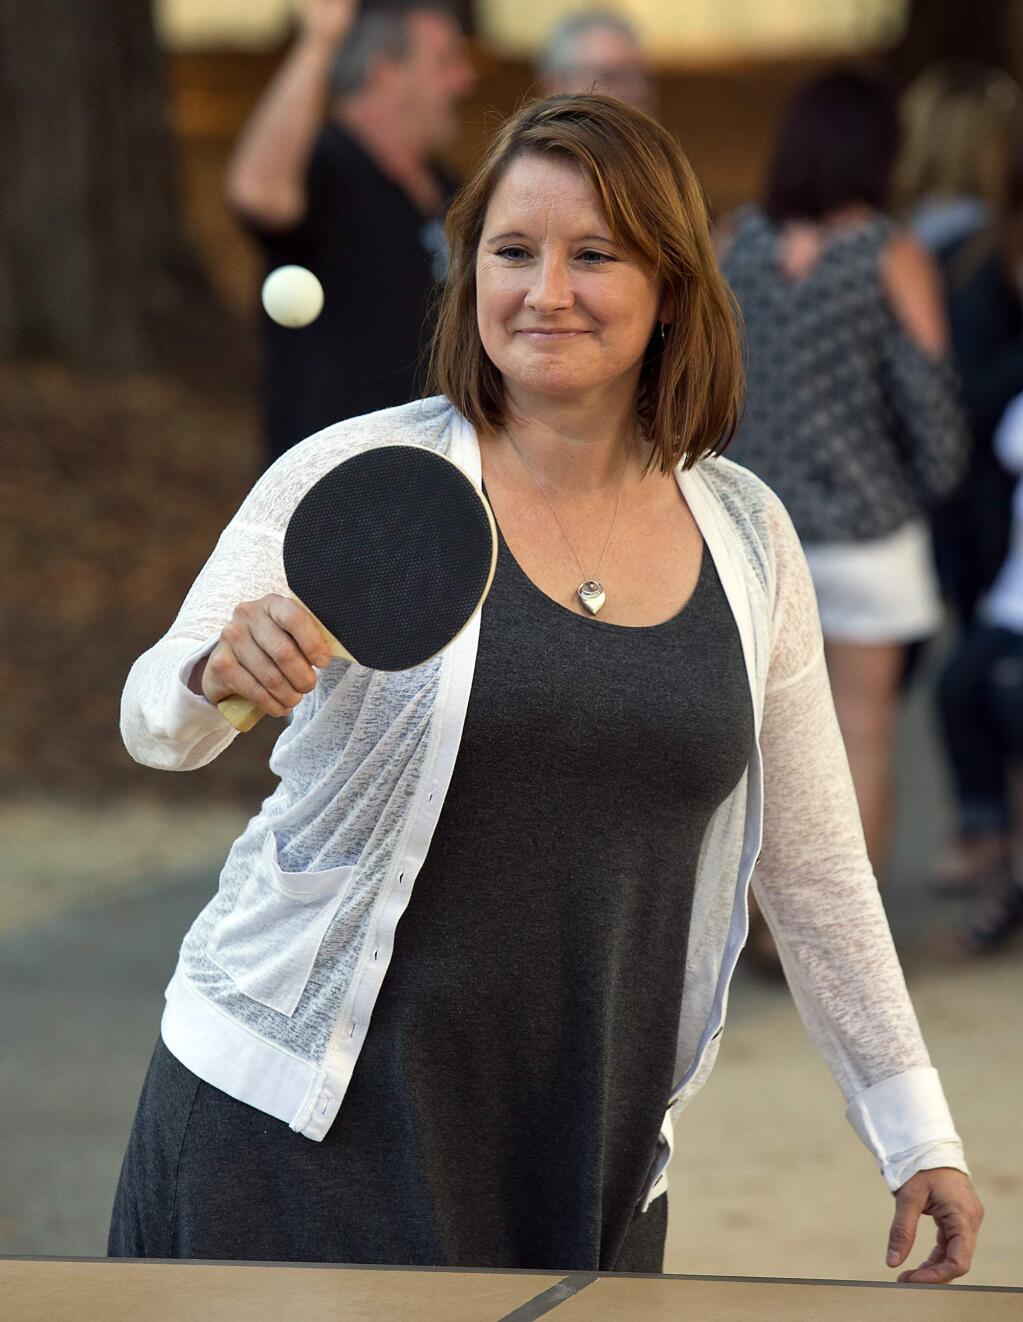 Raeanna Jewel plays ping pong at the Farmster Festival at the Sonoma Mountain Village in Rohnert Park on Saturday.